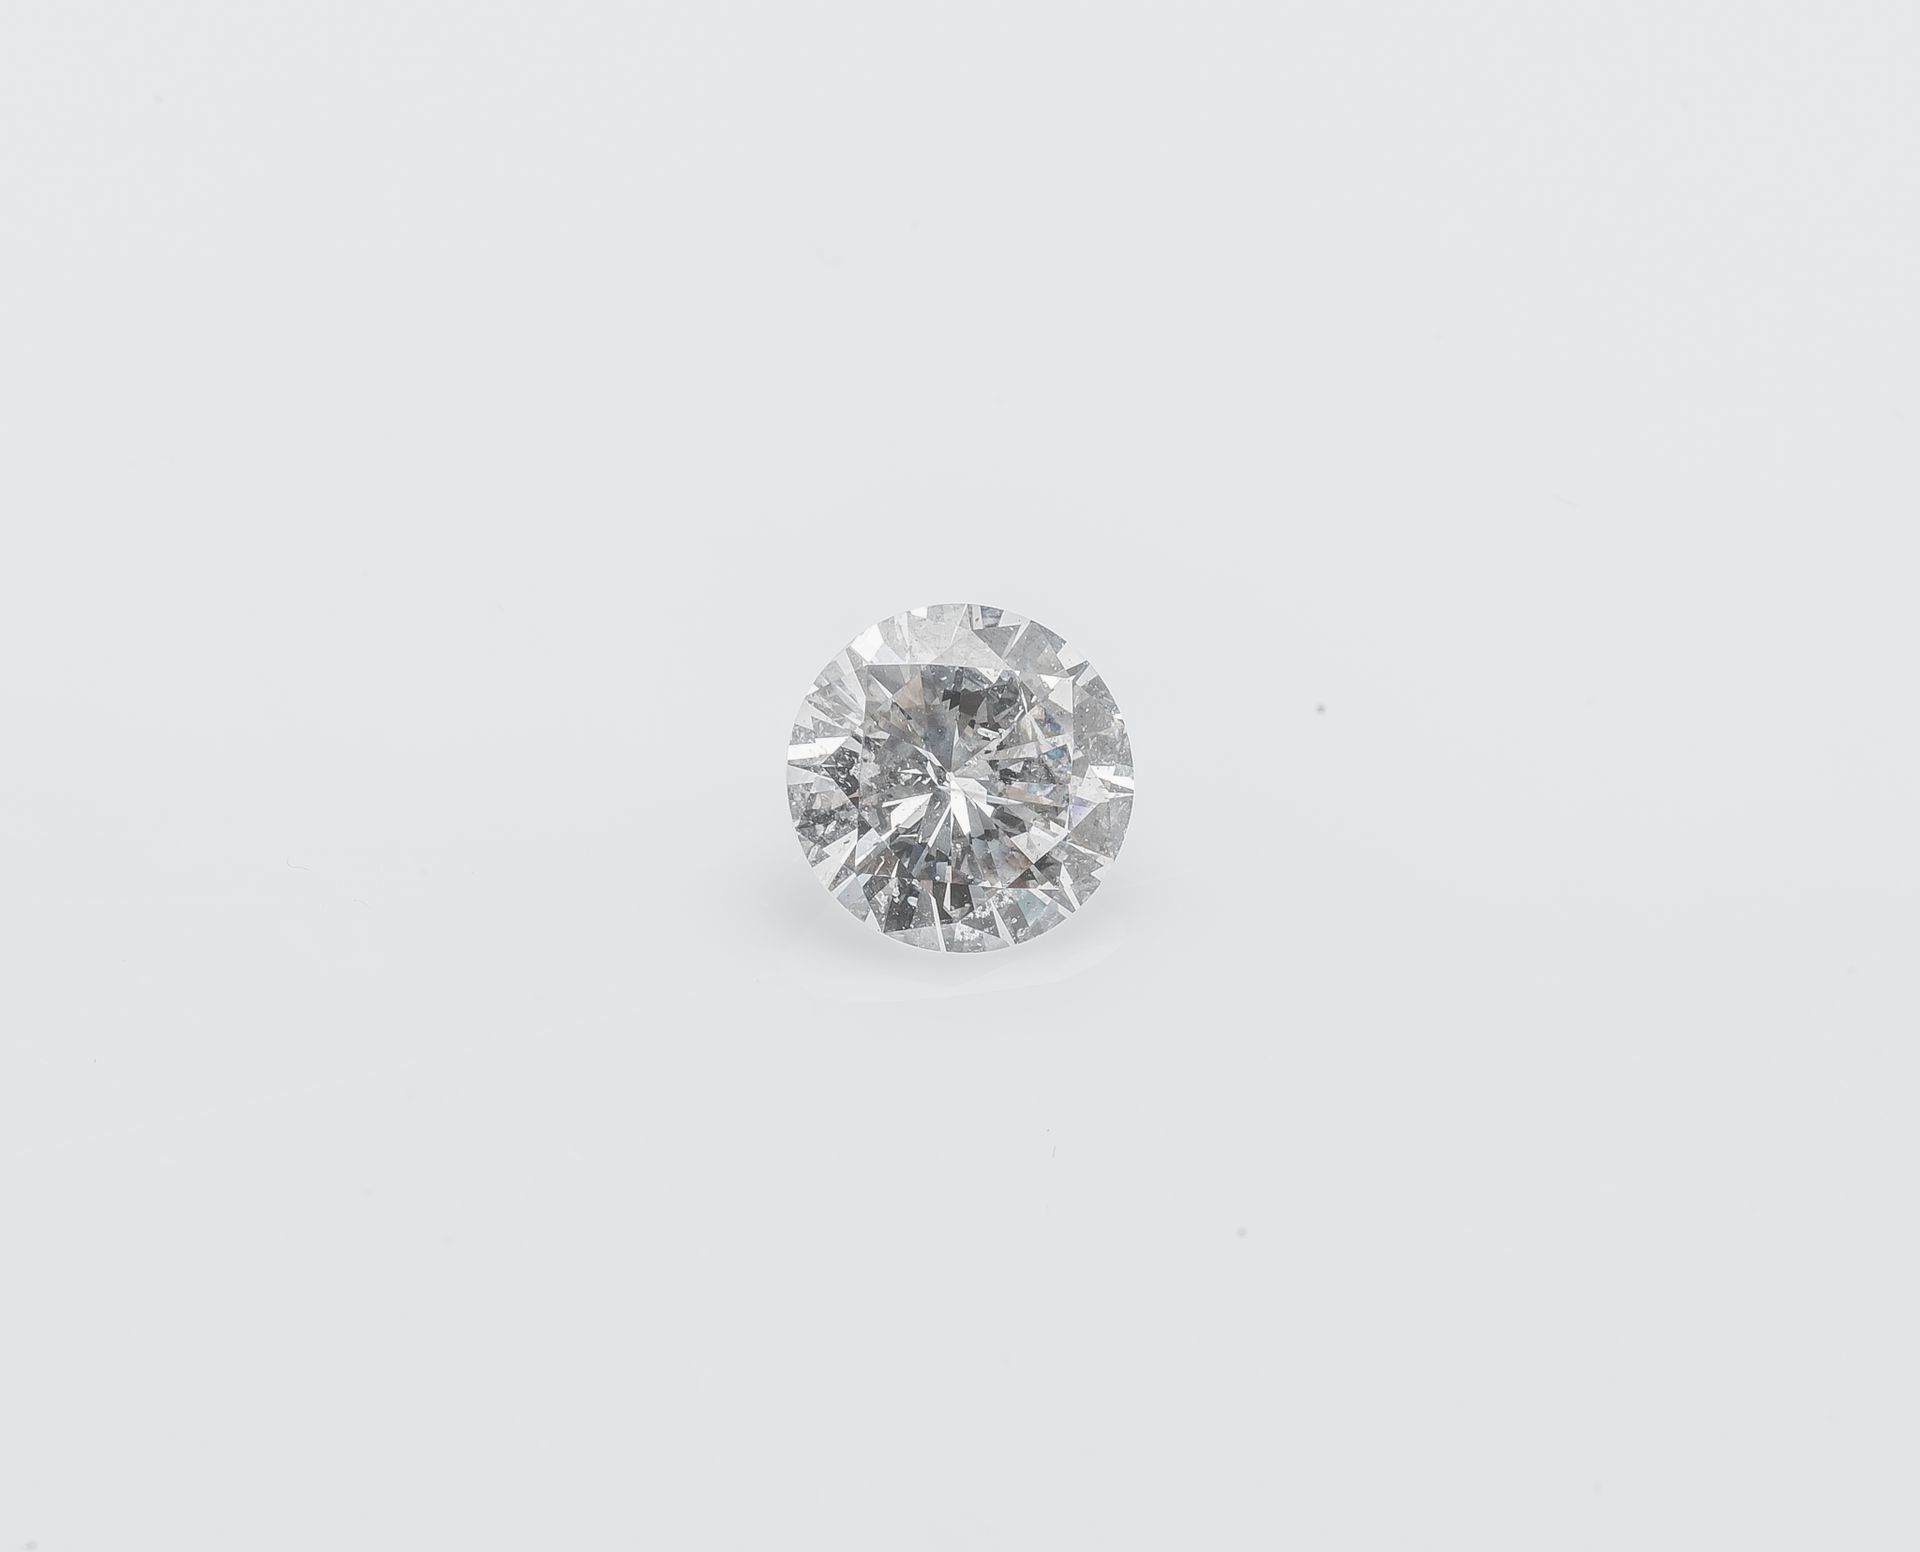 Null A brilliant cut diamond on paper weighing 3.48 carats.

Color E

Clarity SI&hellip;